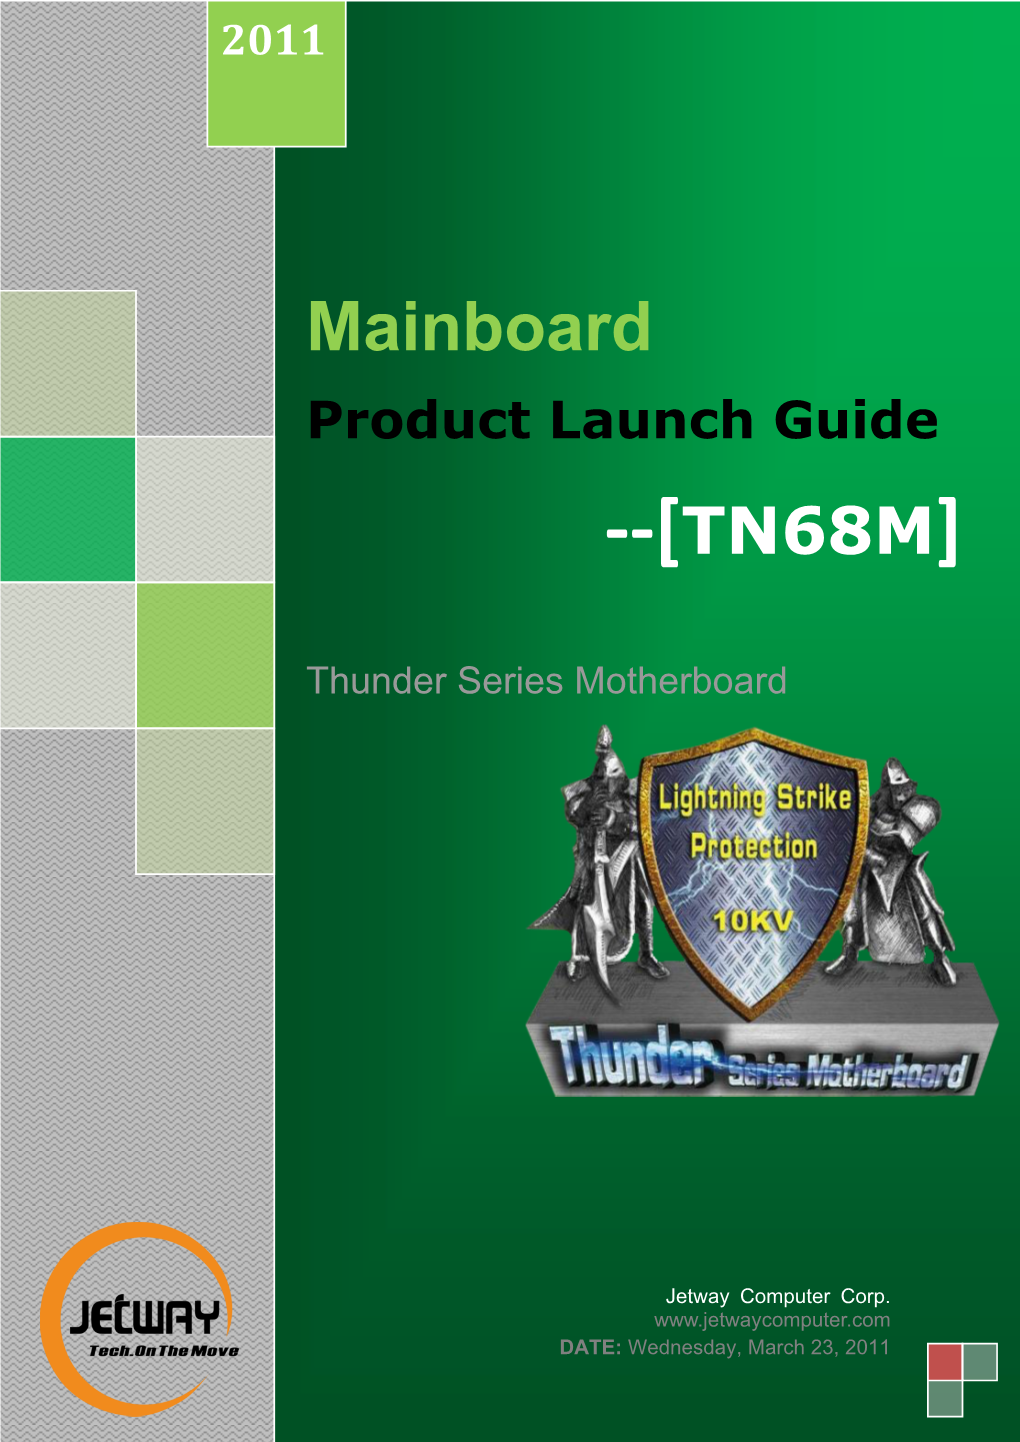 Mainboard Product Launch Guide